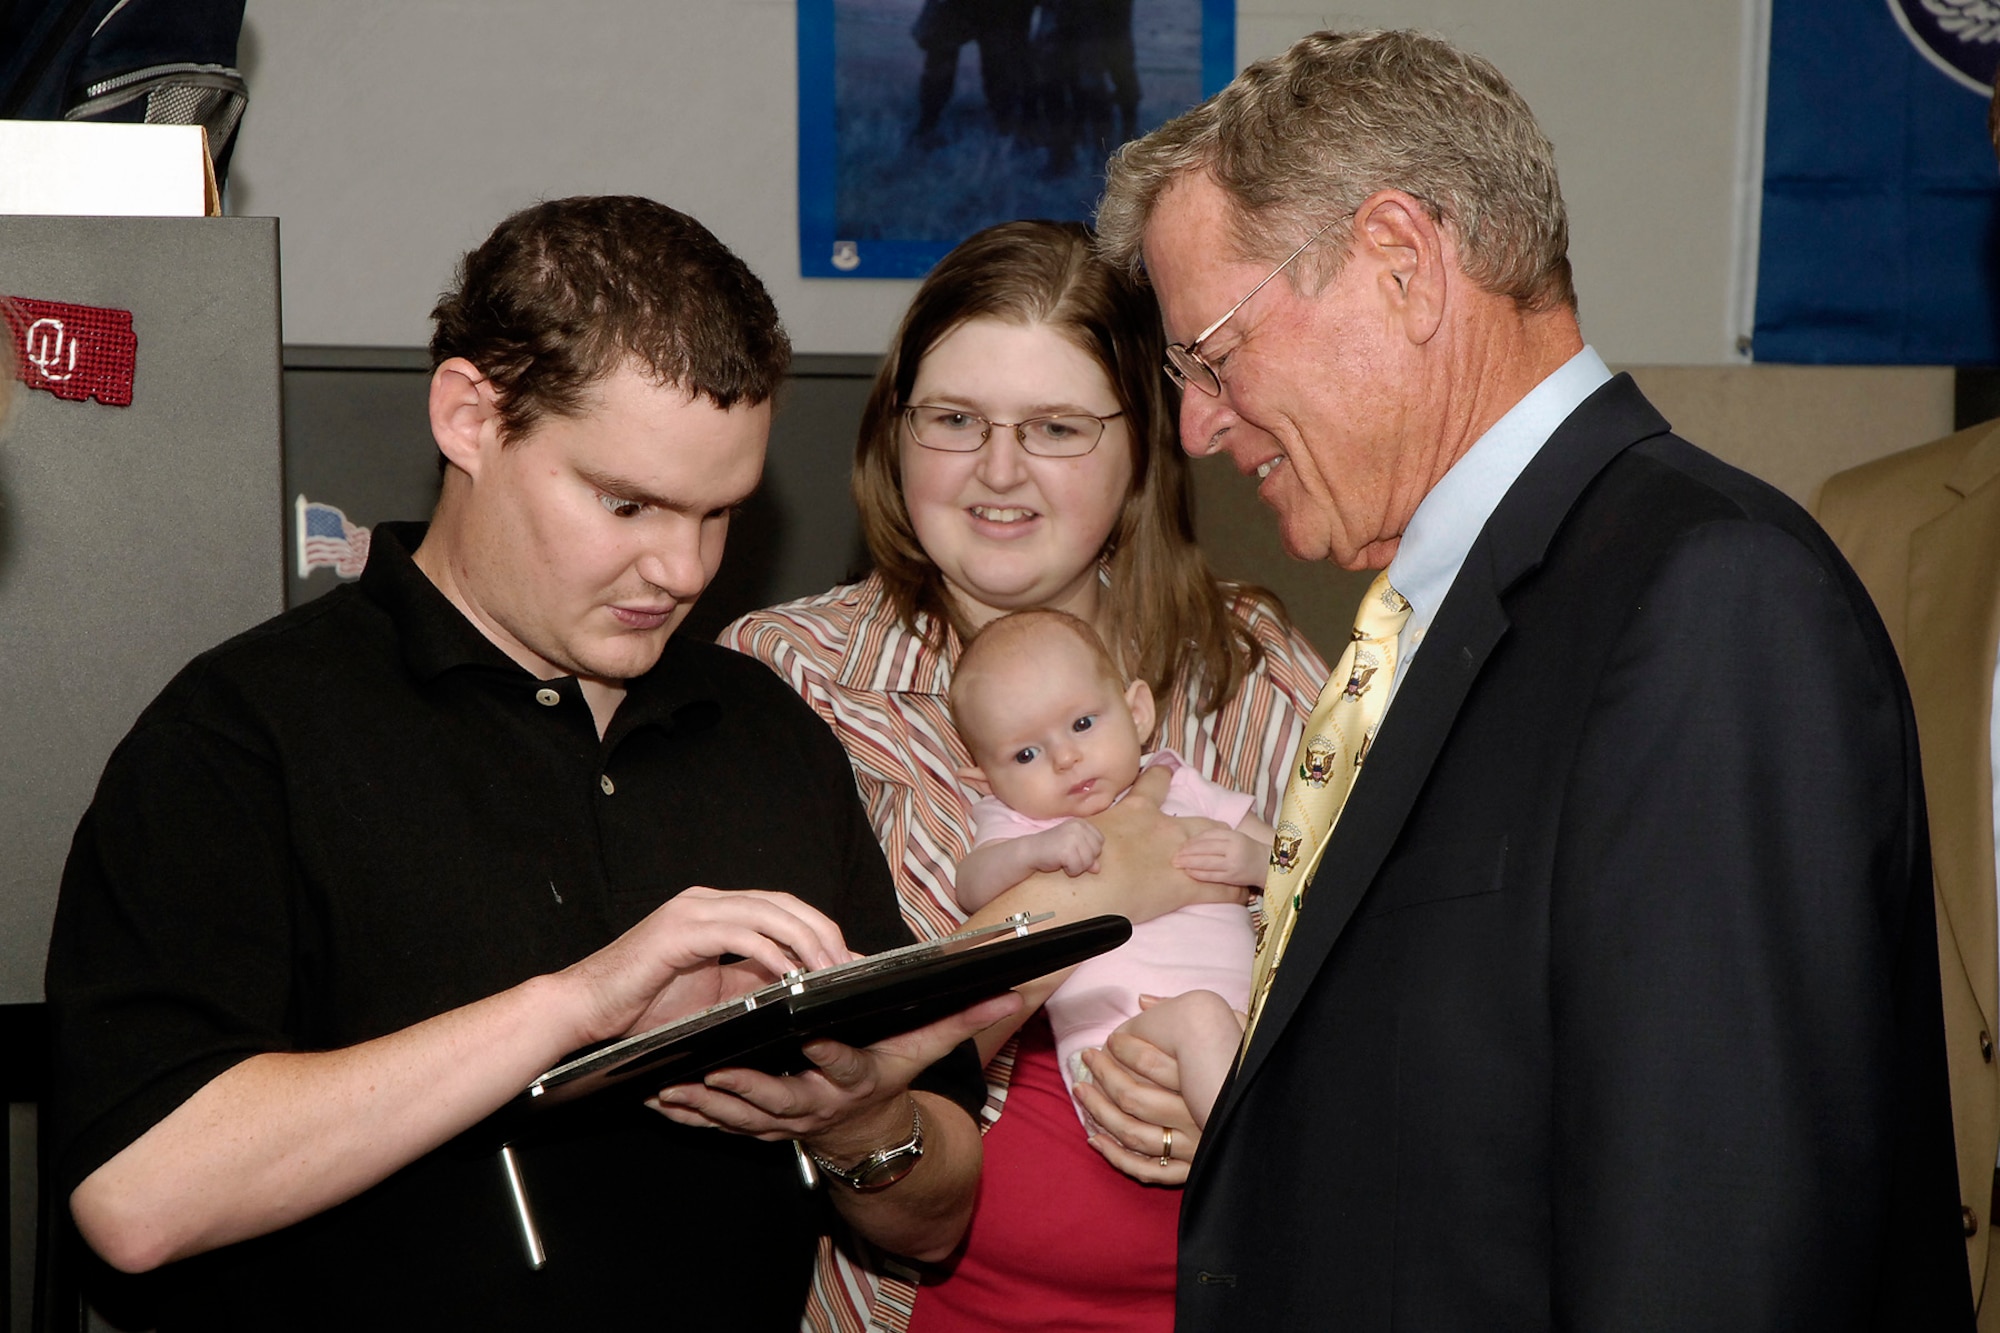 David Gwin, who works for Oklahoma League of the Blind as a switchboard operator at Tinker, received the Peter J. Salmon Award as Employee of the Year from National Industries for the Blind. During a recent visit to Tinker, Senator James Inhofe presented Mr. Gwin with a plaque while Mr. Gwin’s wife Kristel and their daughter Gabrielle look on. (Air Force photo by Kelly White)